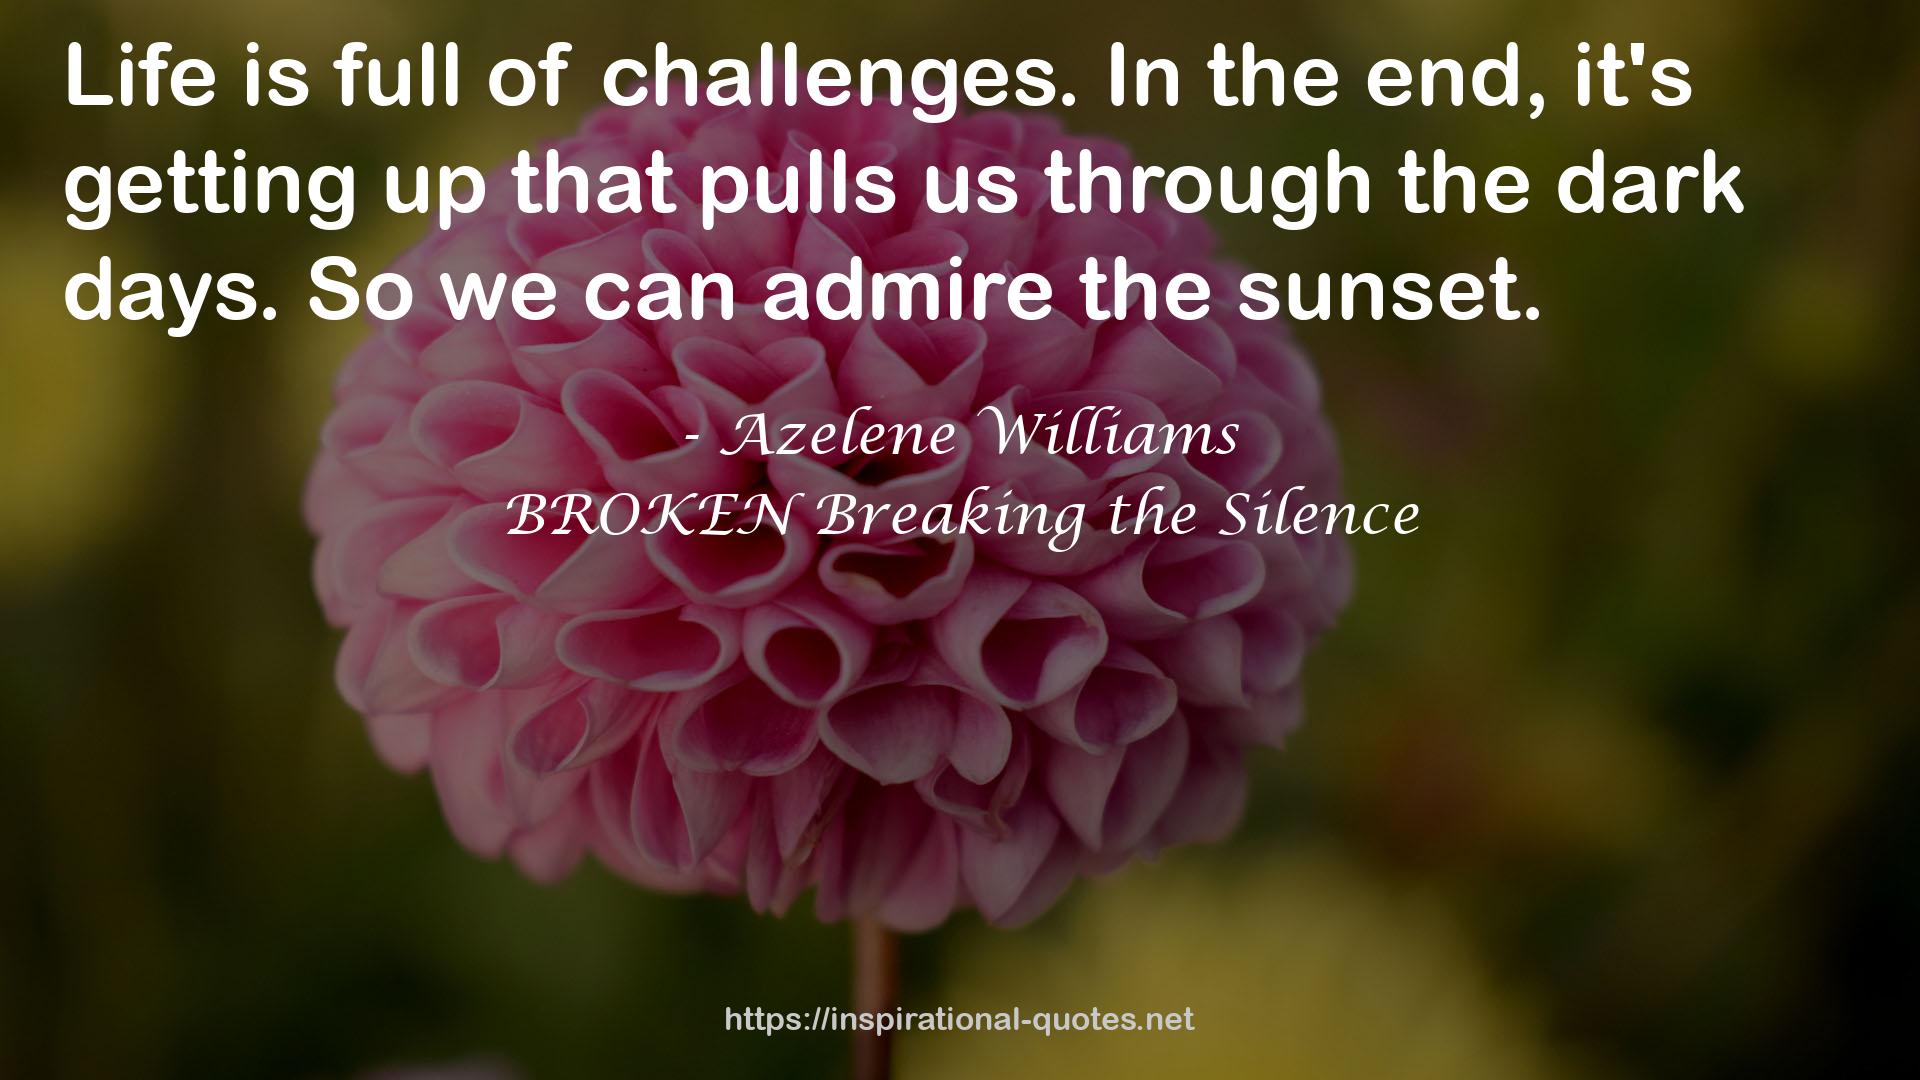 BROKEN Breaking the Silence QUOTES